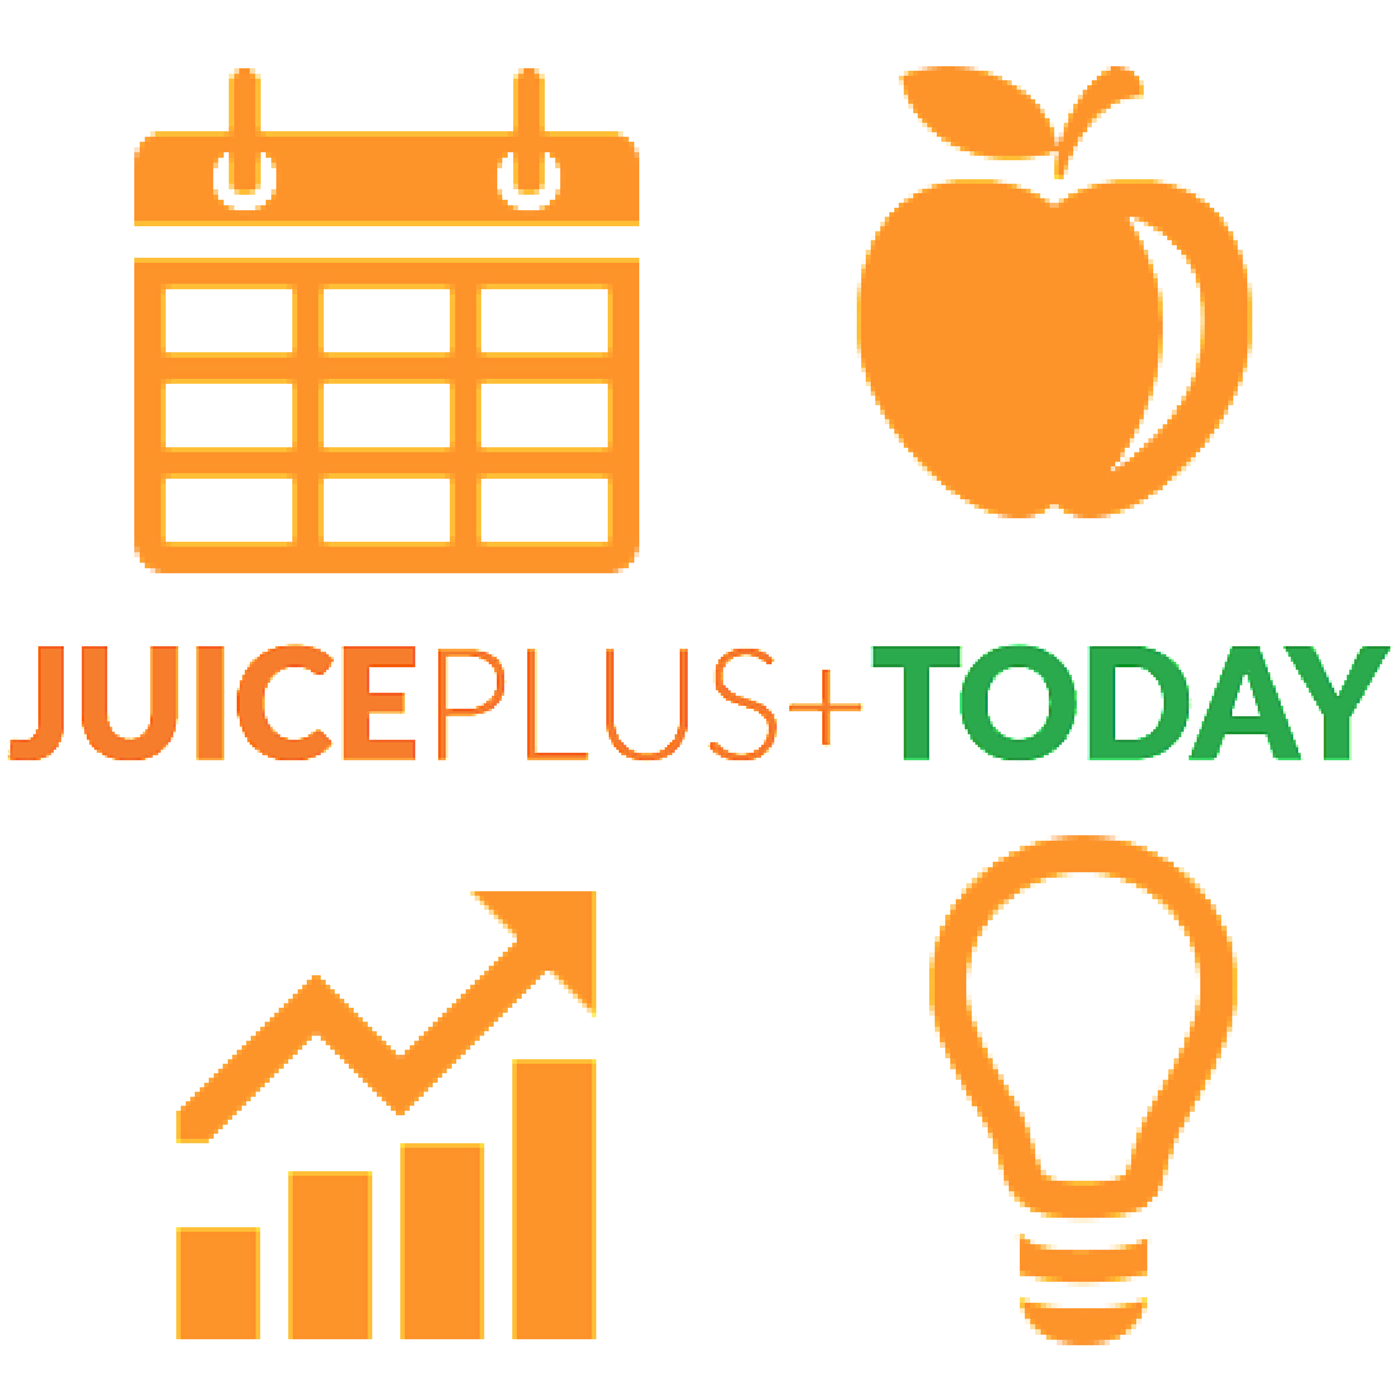 Juice Plus Today - Curt Beavers Serving the Juice Plus Community so that we can be better equipped to inspire healthy living and have eternal impact!